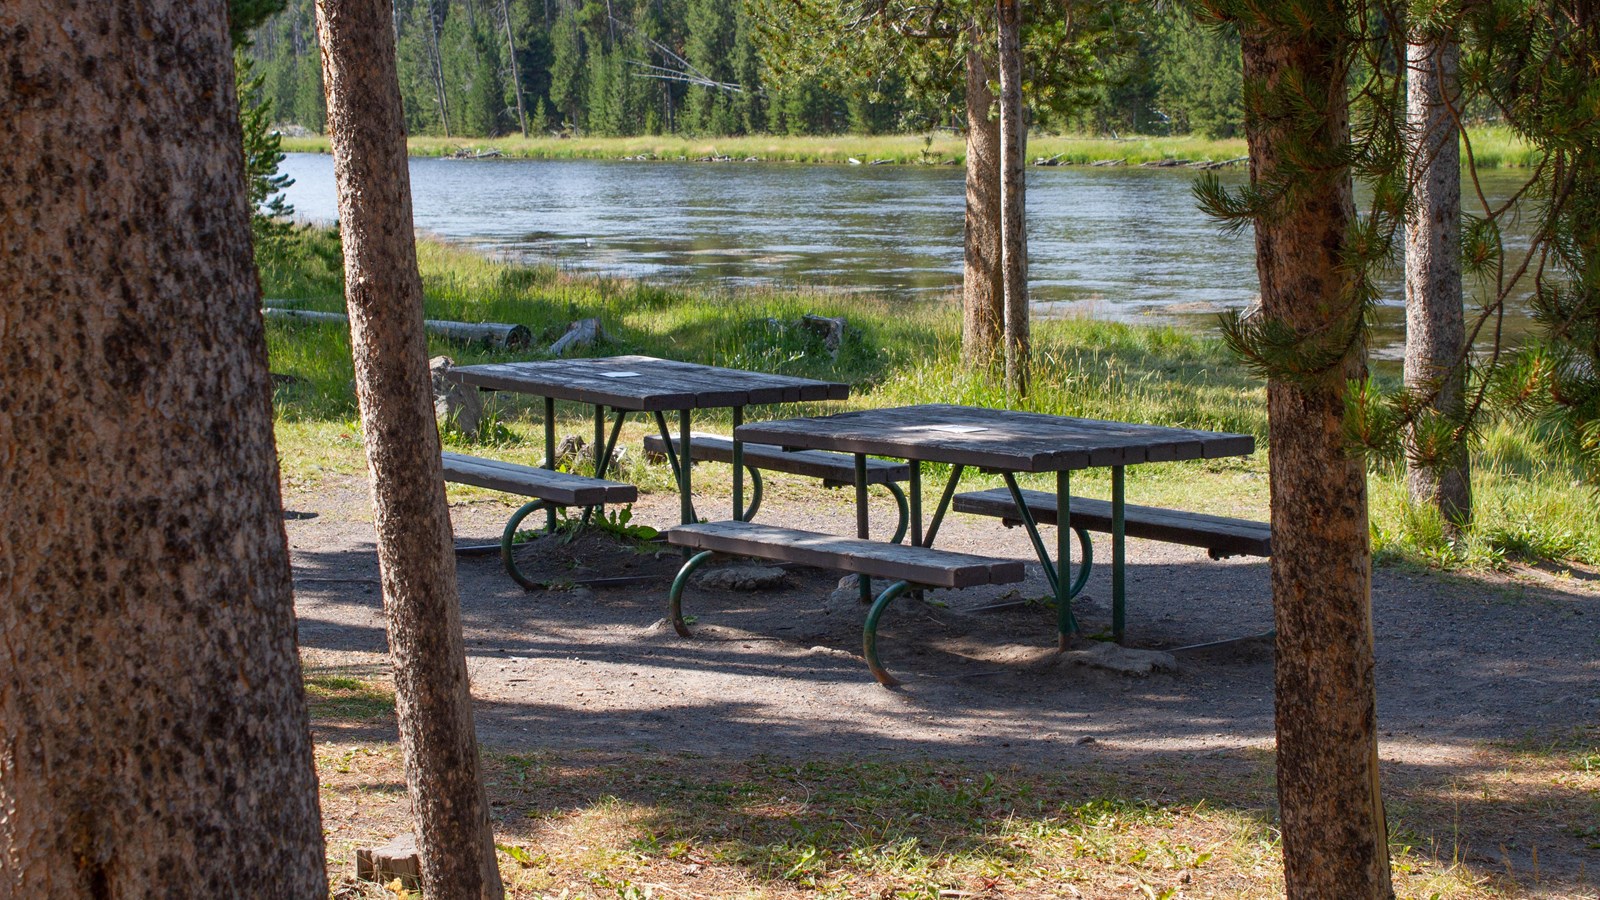 A picnic table in the forest near a large stream